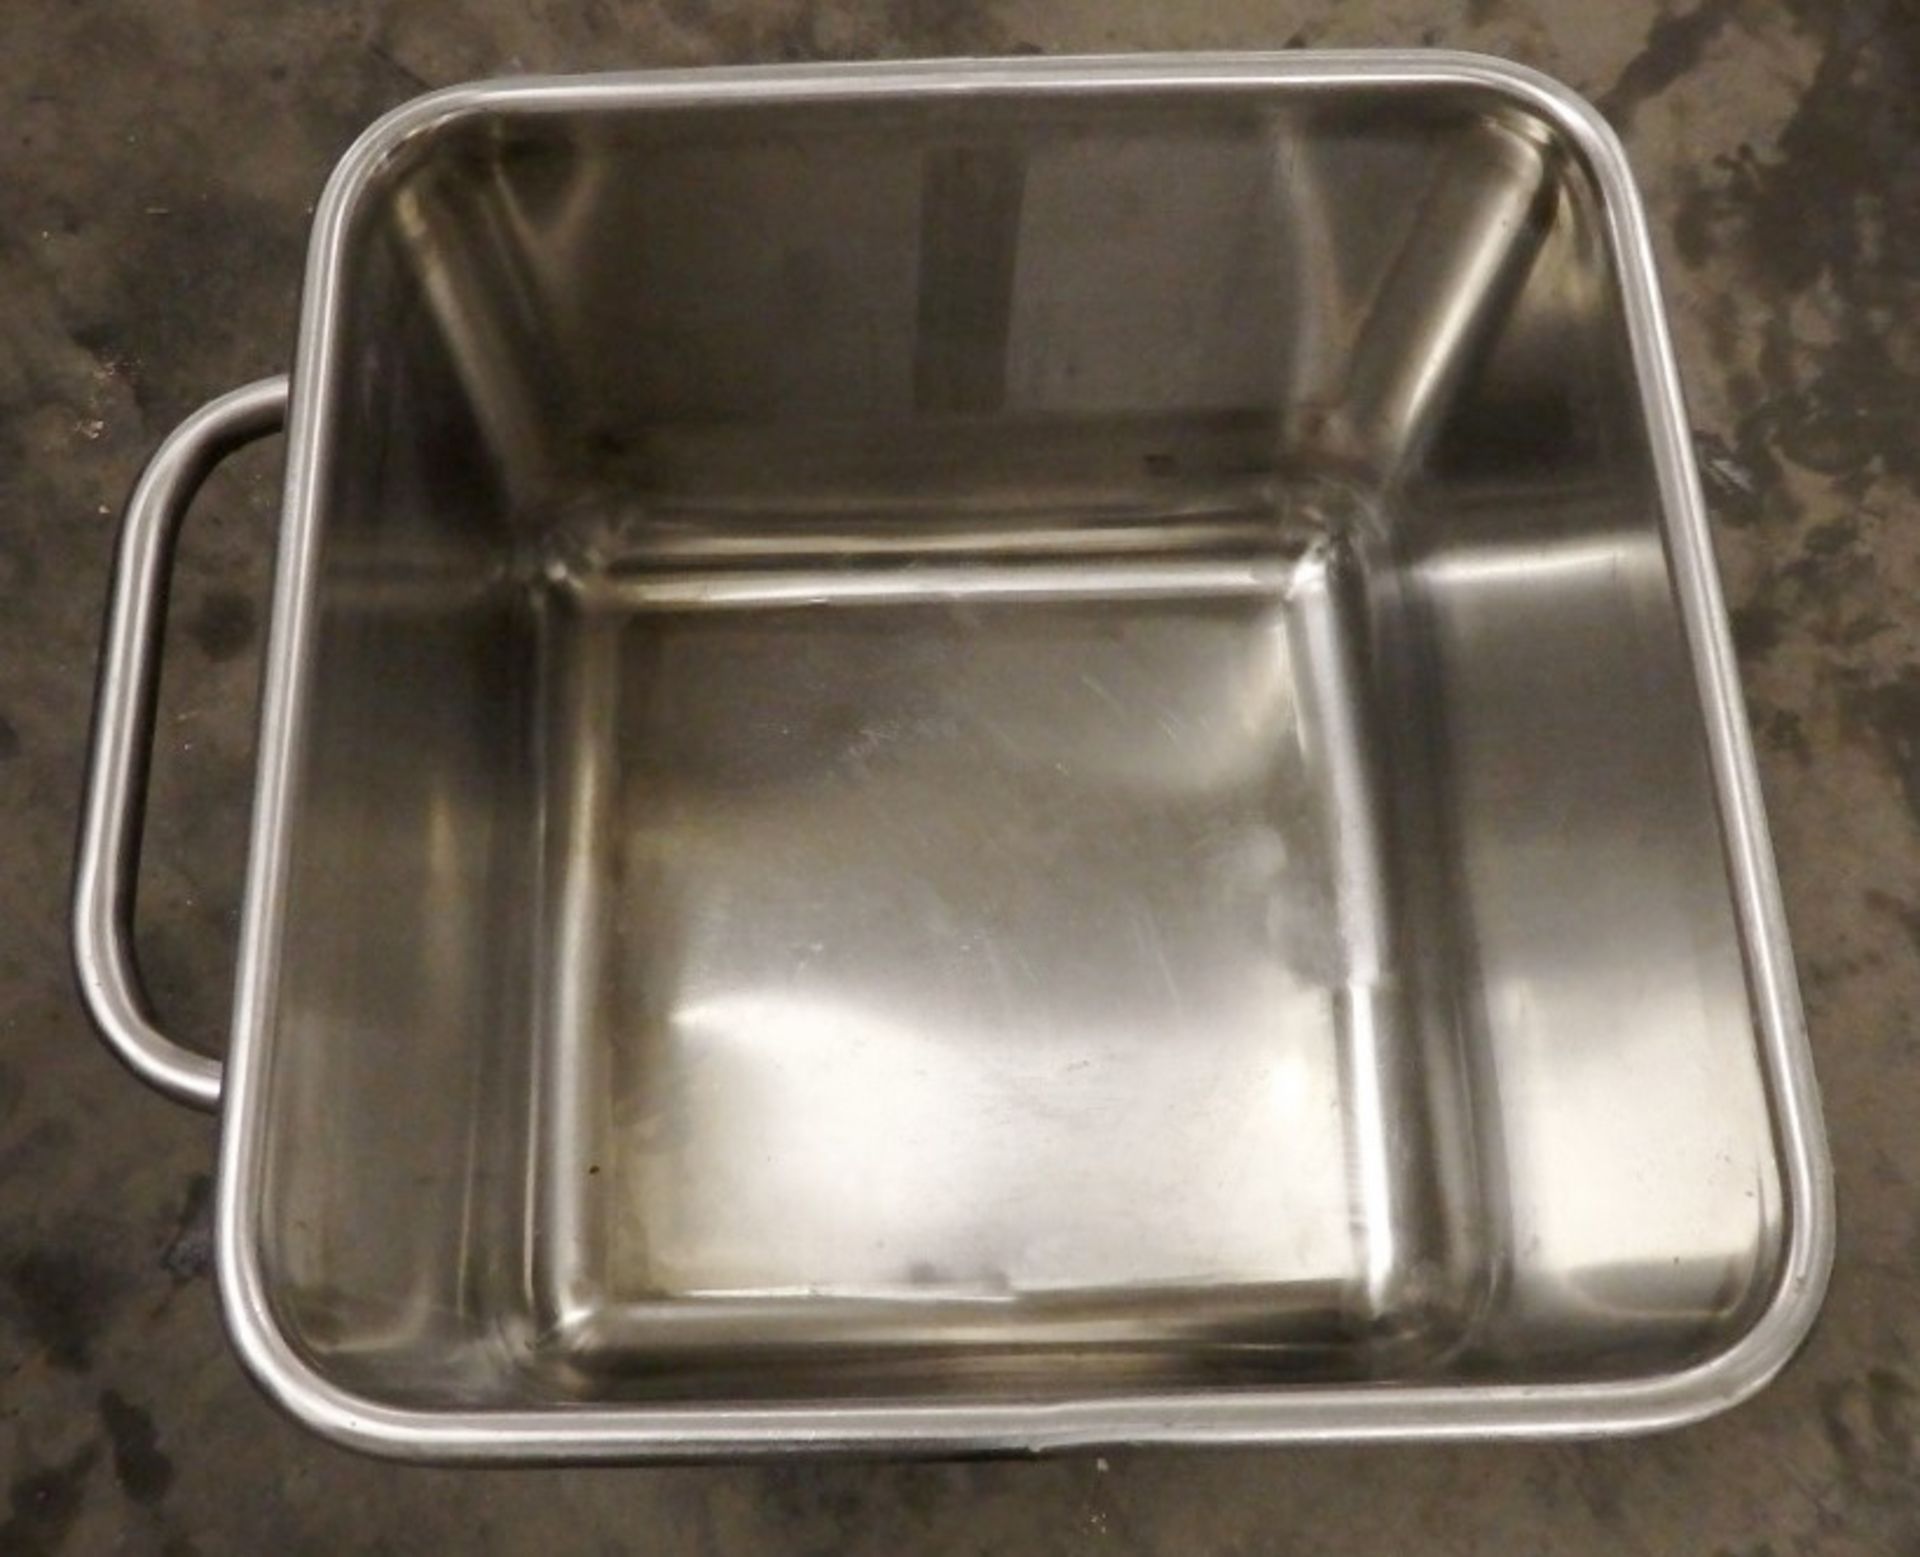 1 x Stainless Steel Catering Container On Castors With Handle - Dimensions: W58 x D58 x H58cm - Ref: - Image 5 of 5